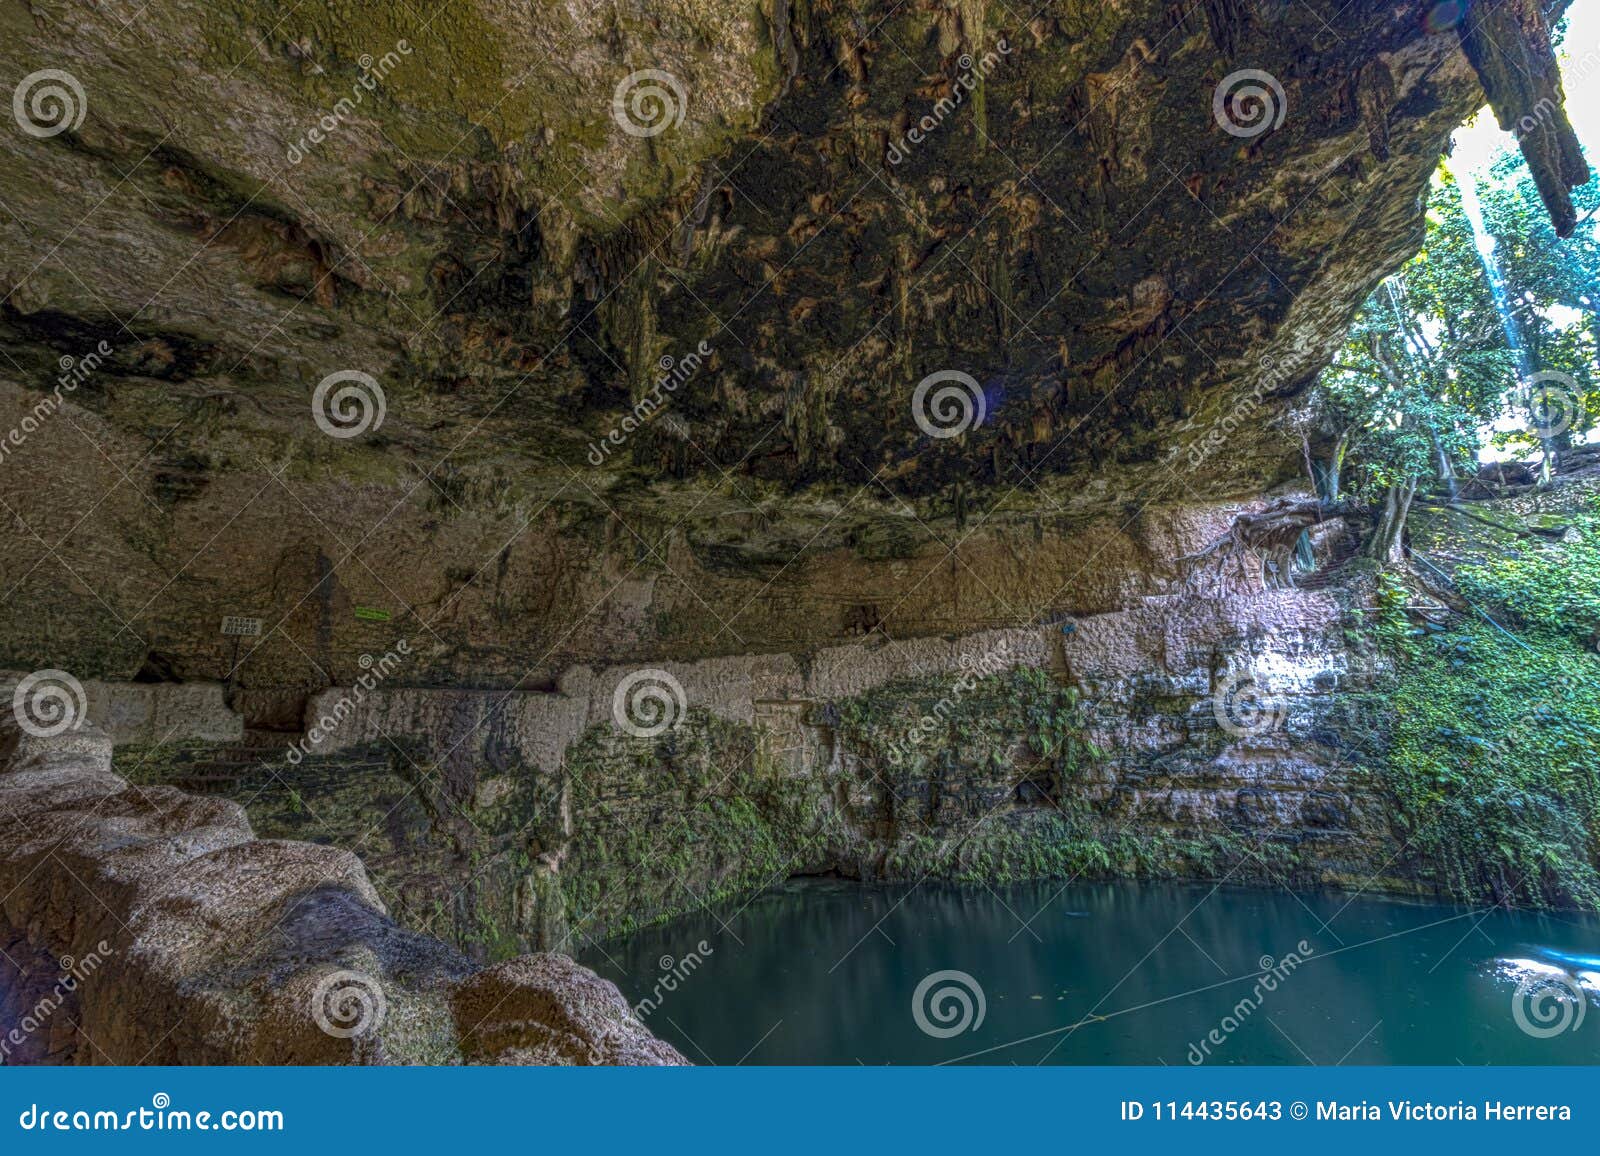 Natural Sinkhole In Mexico Stock Image Image Of Pool